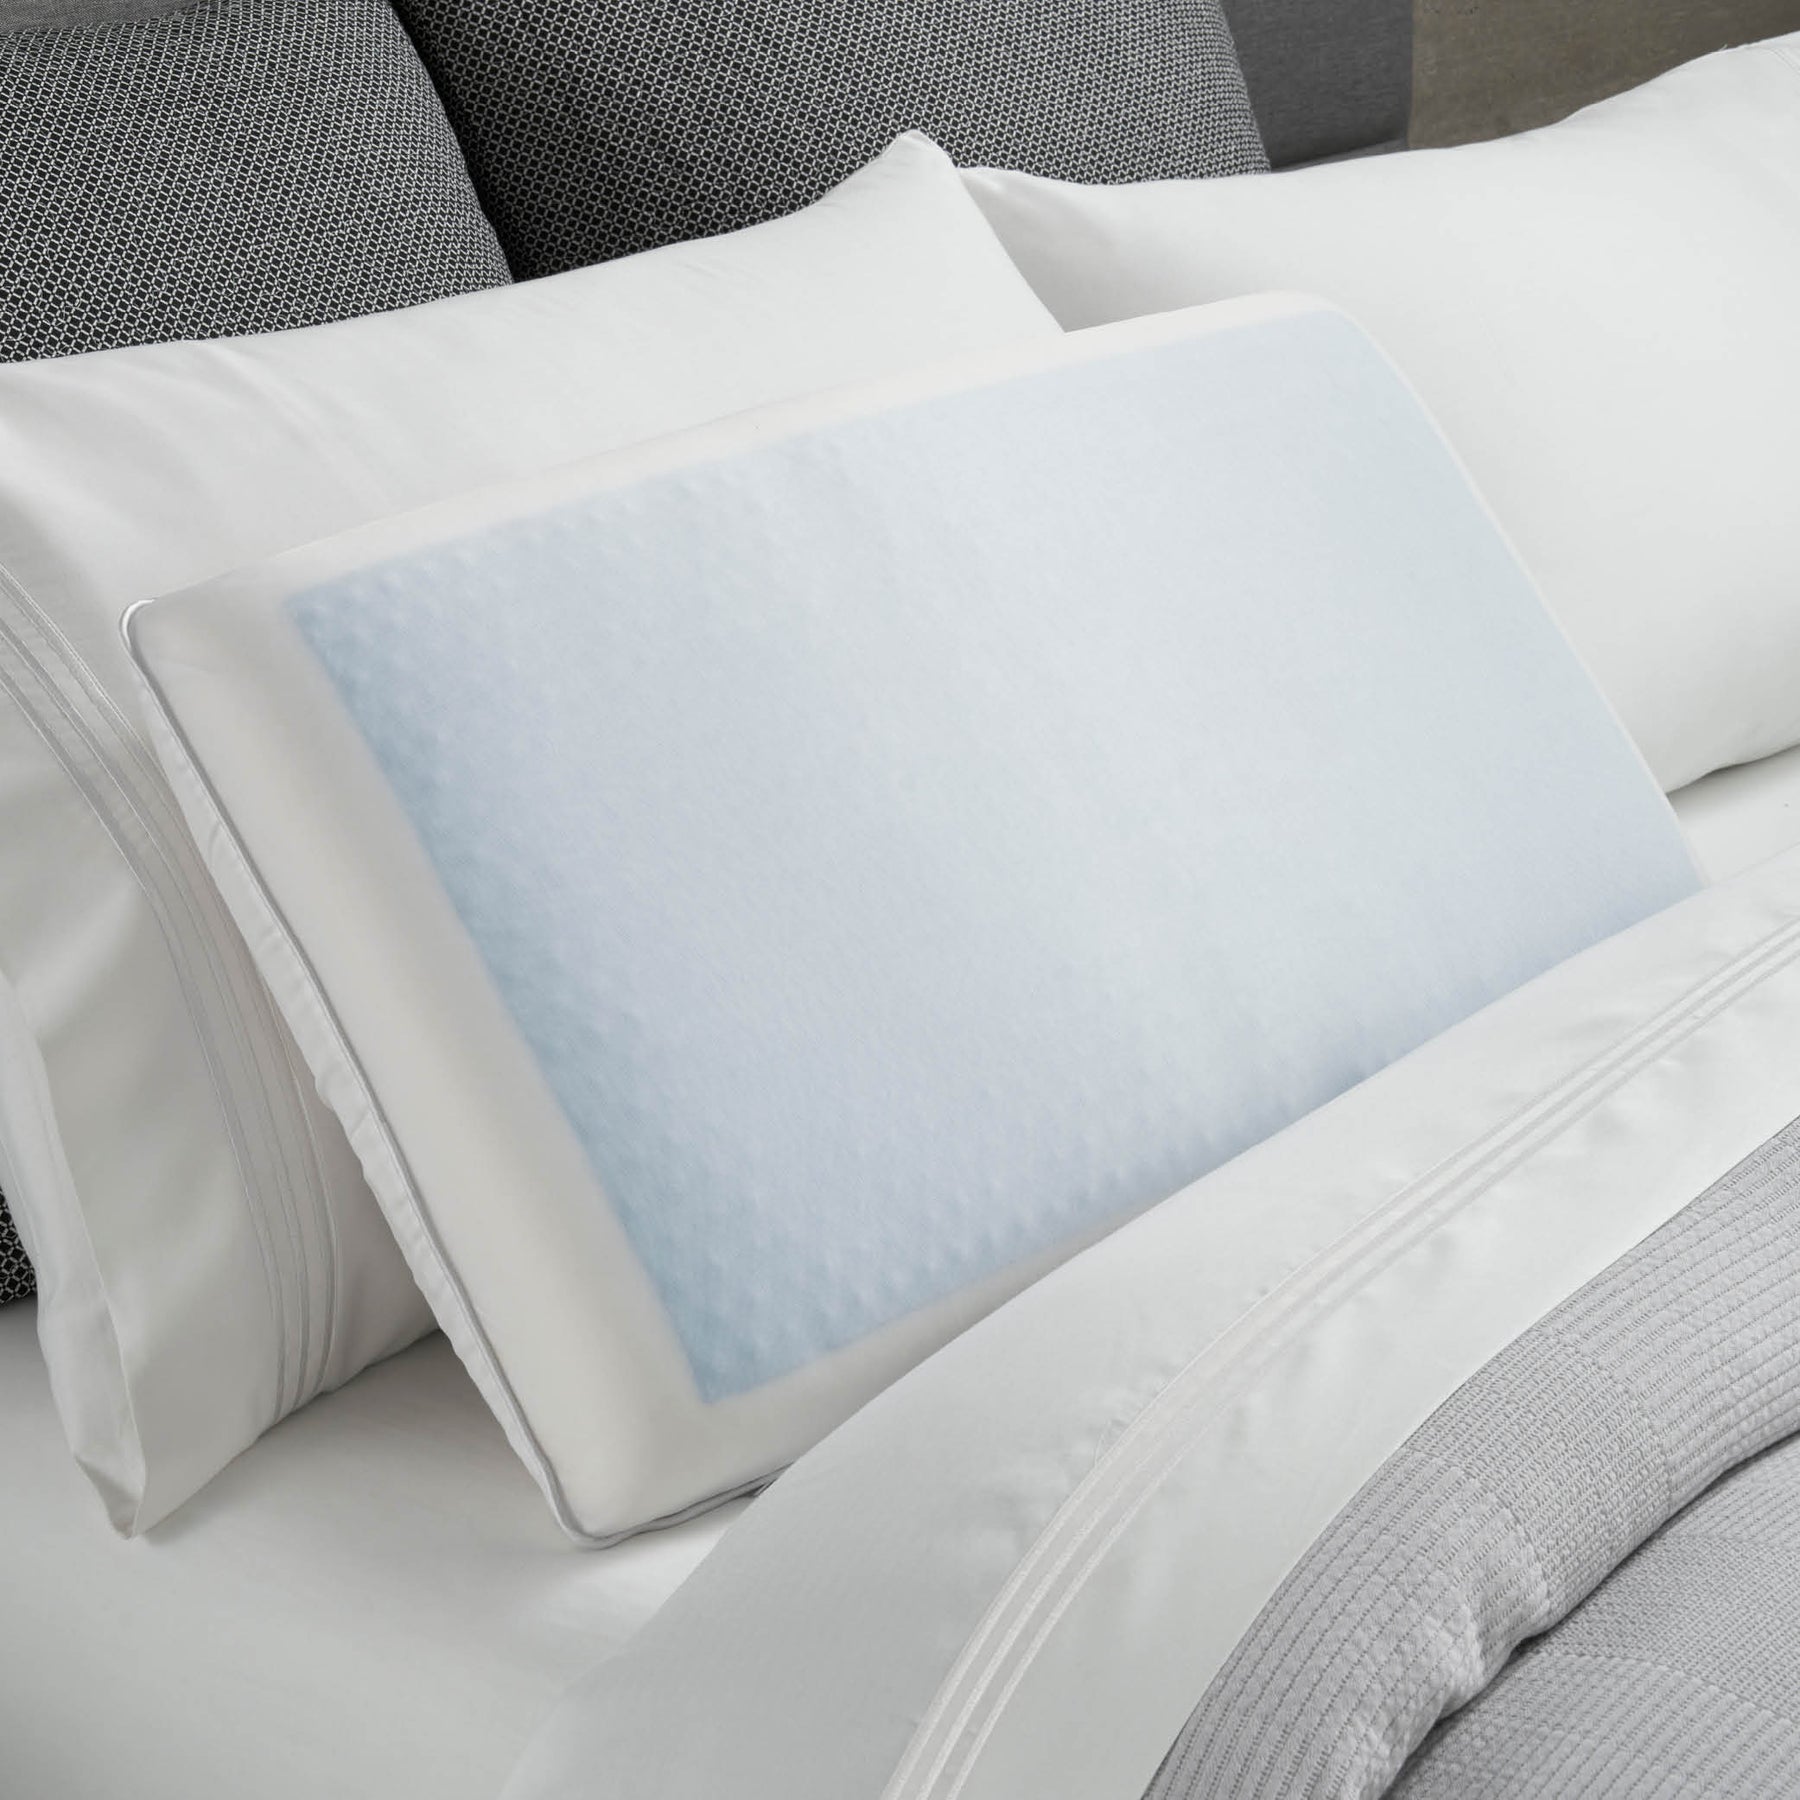 Image of the Cooling Replenish Pillow on a gray and white bed with the cool gel side facing up